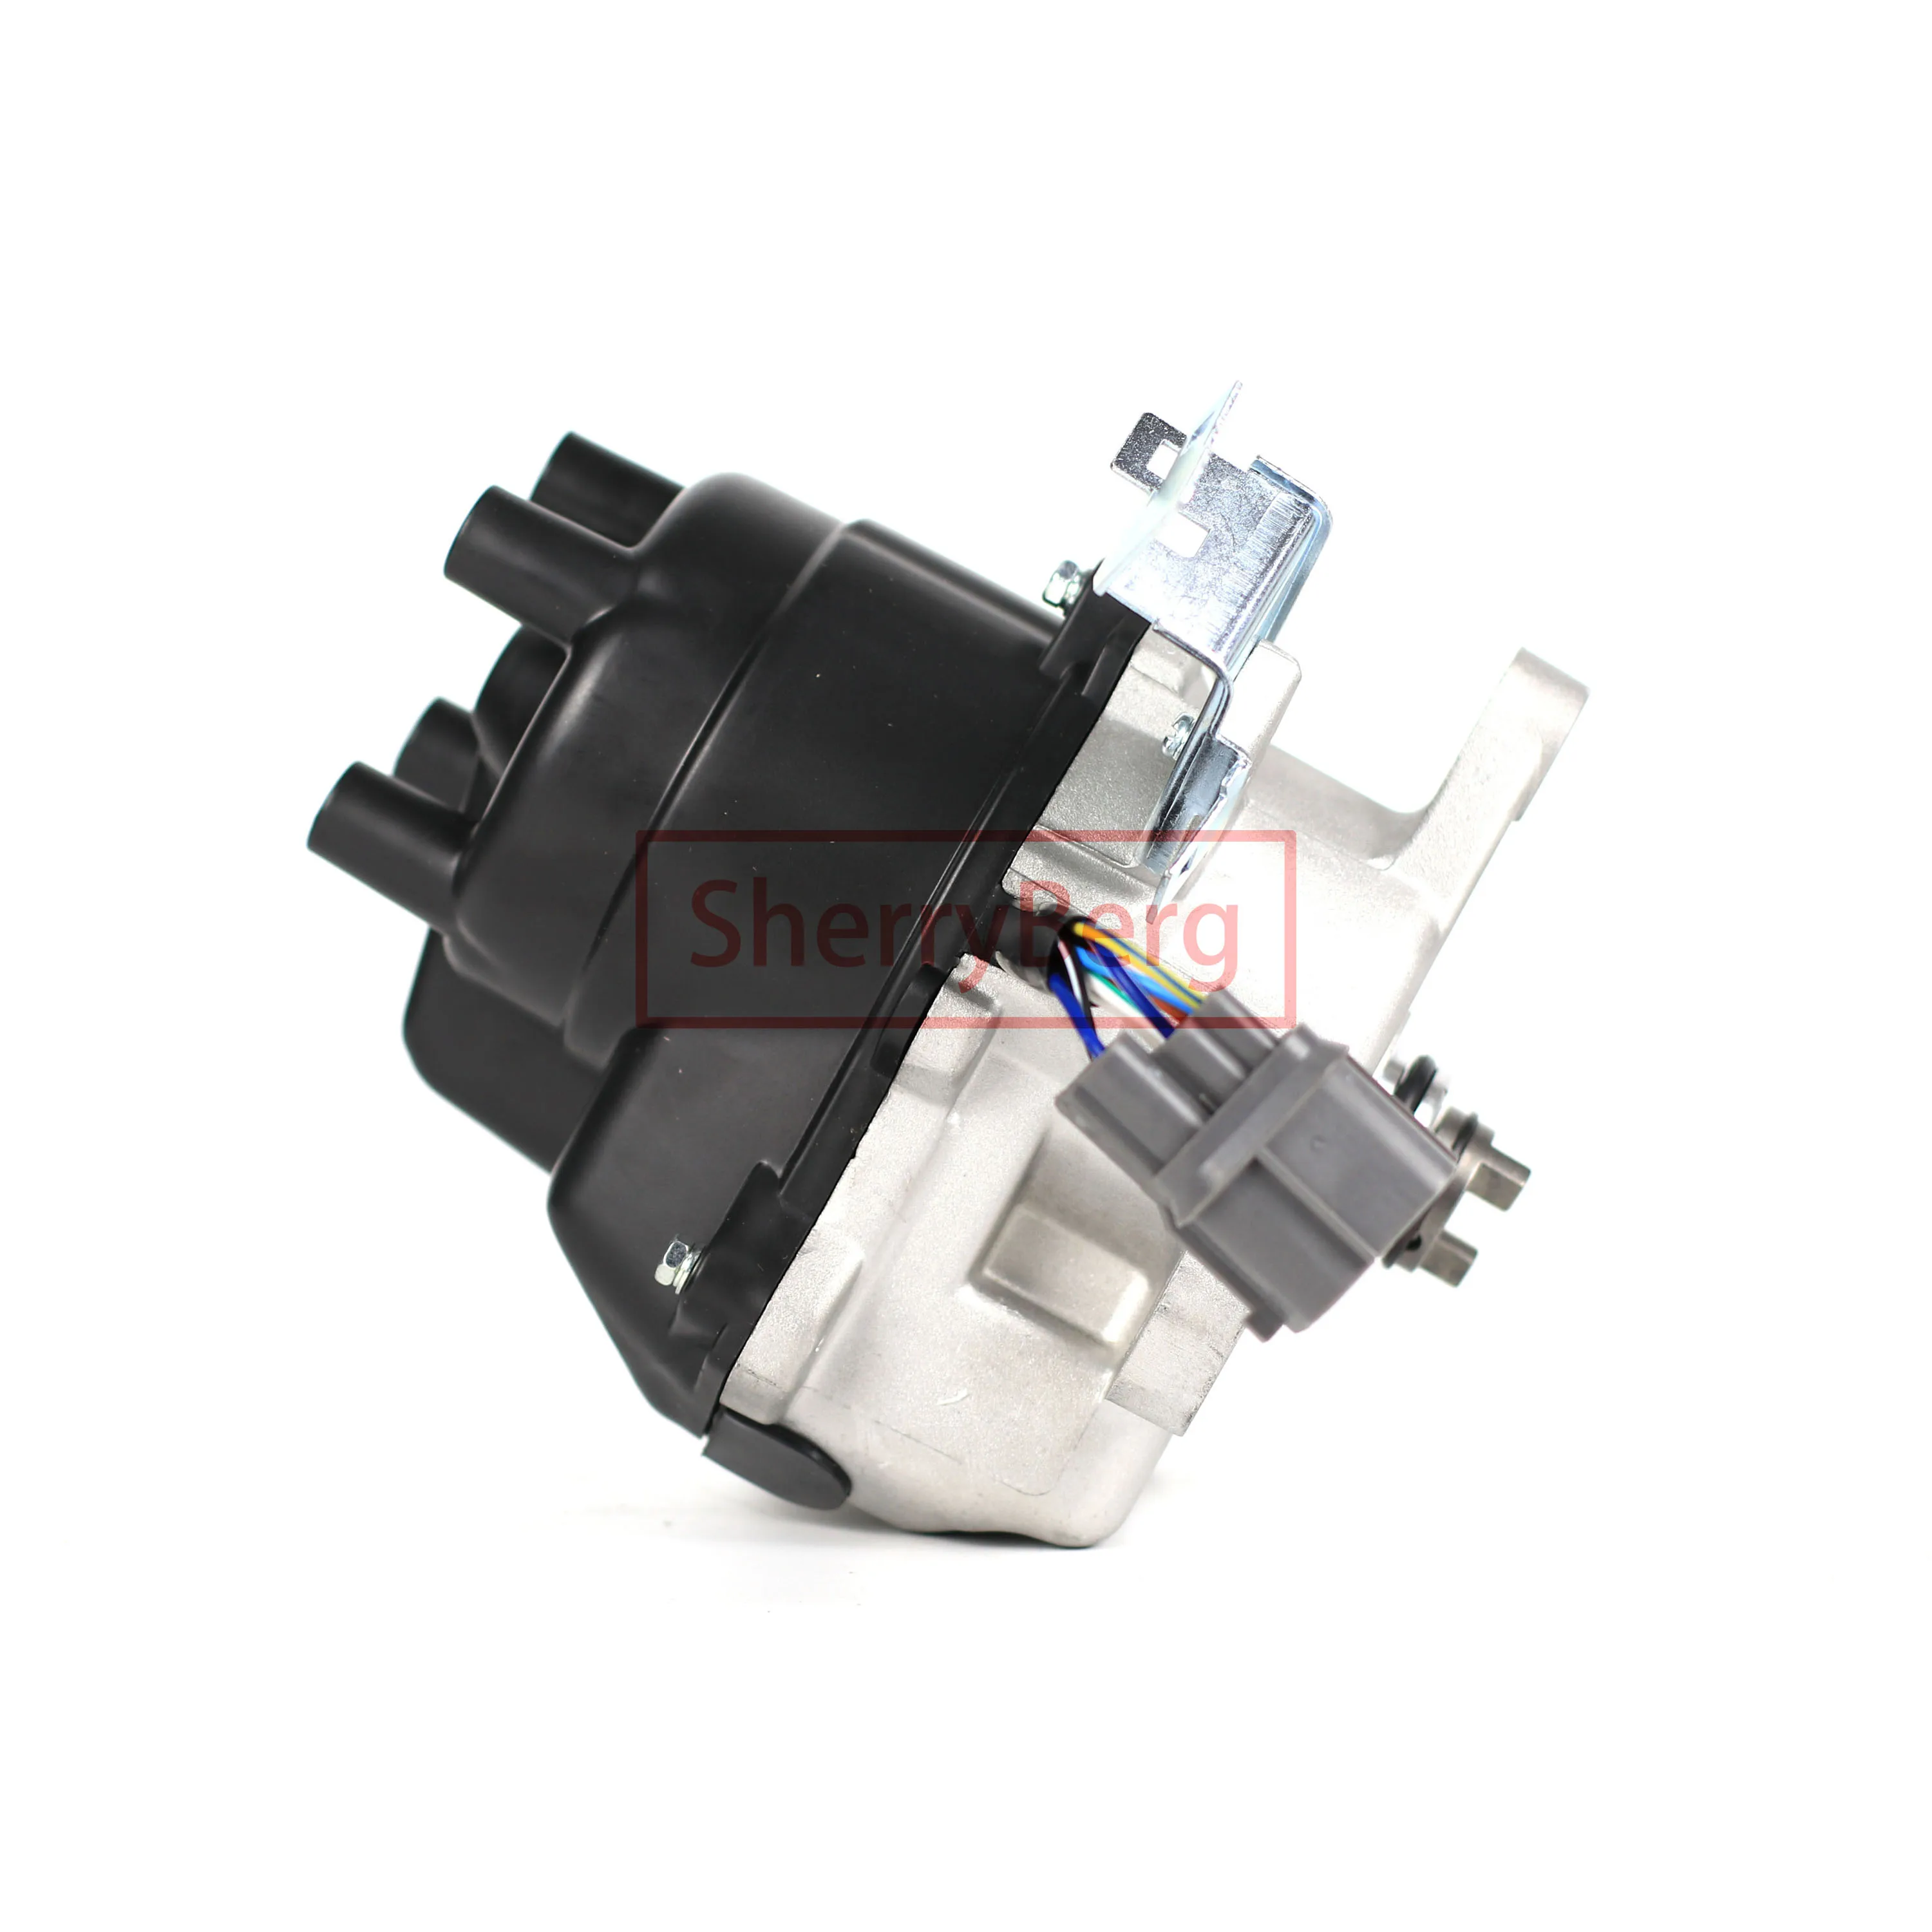 

SherryBerg New Complete Distributor For Honda Accord 2.2L-L4 1995 30100-P0A-A02 84-17481 30105-P0A-A02 HT20 31-17481 DST17481